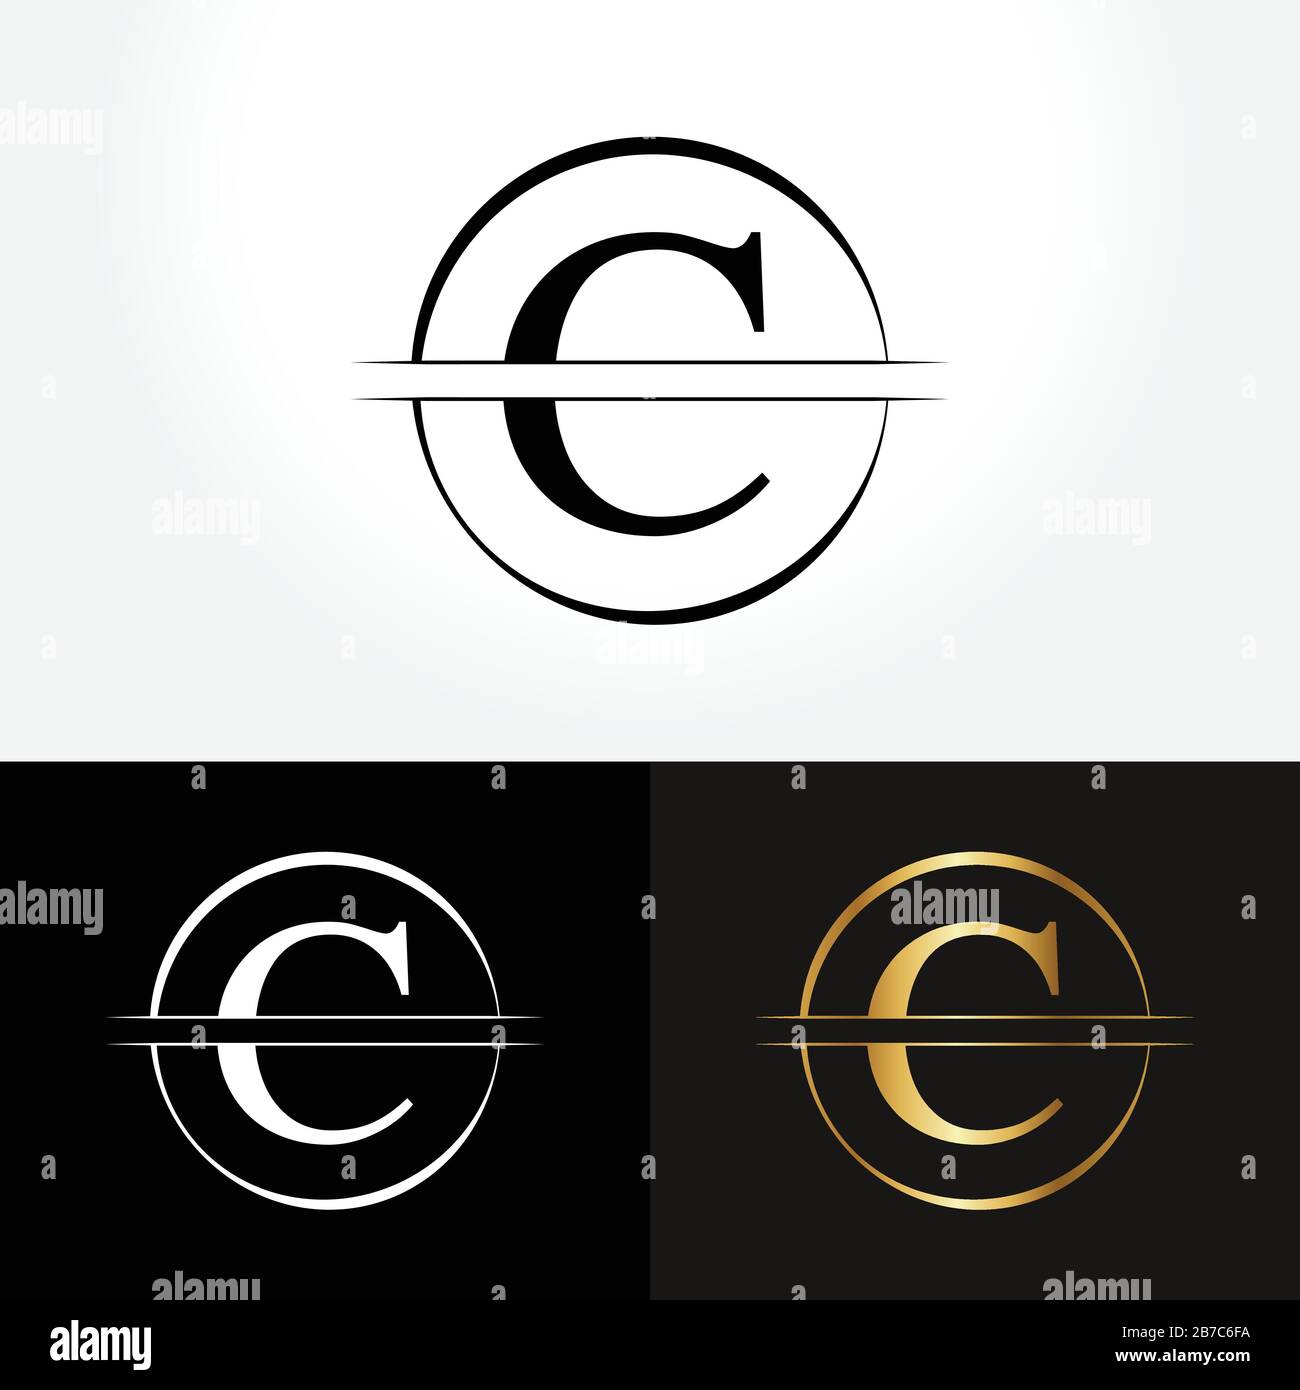 Initial Circle Letter C Logo Design Business Vector Template ...